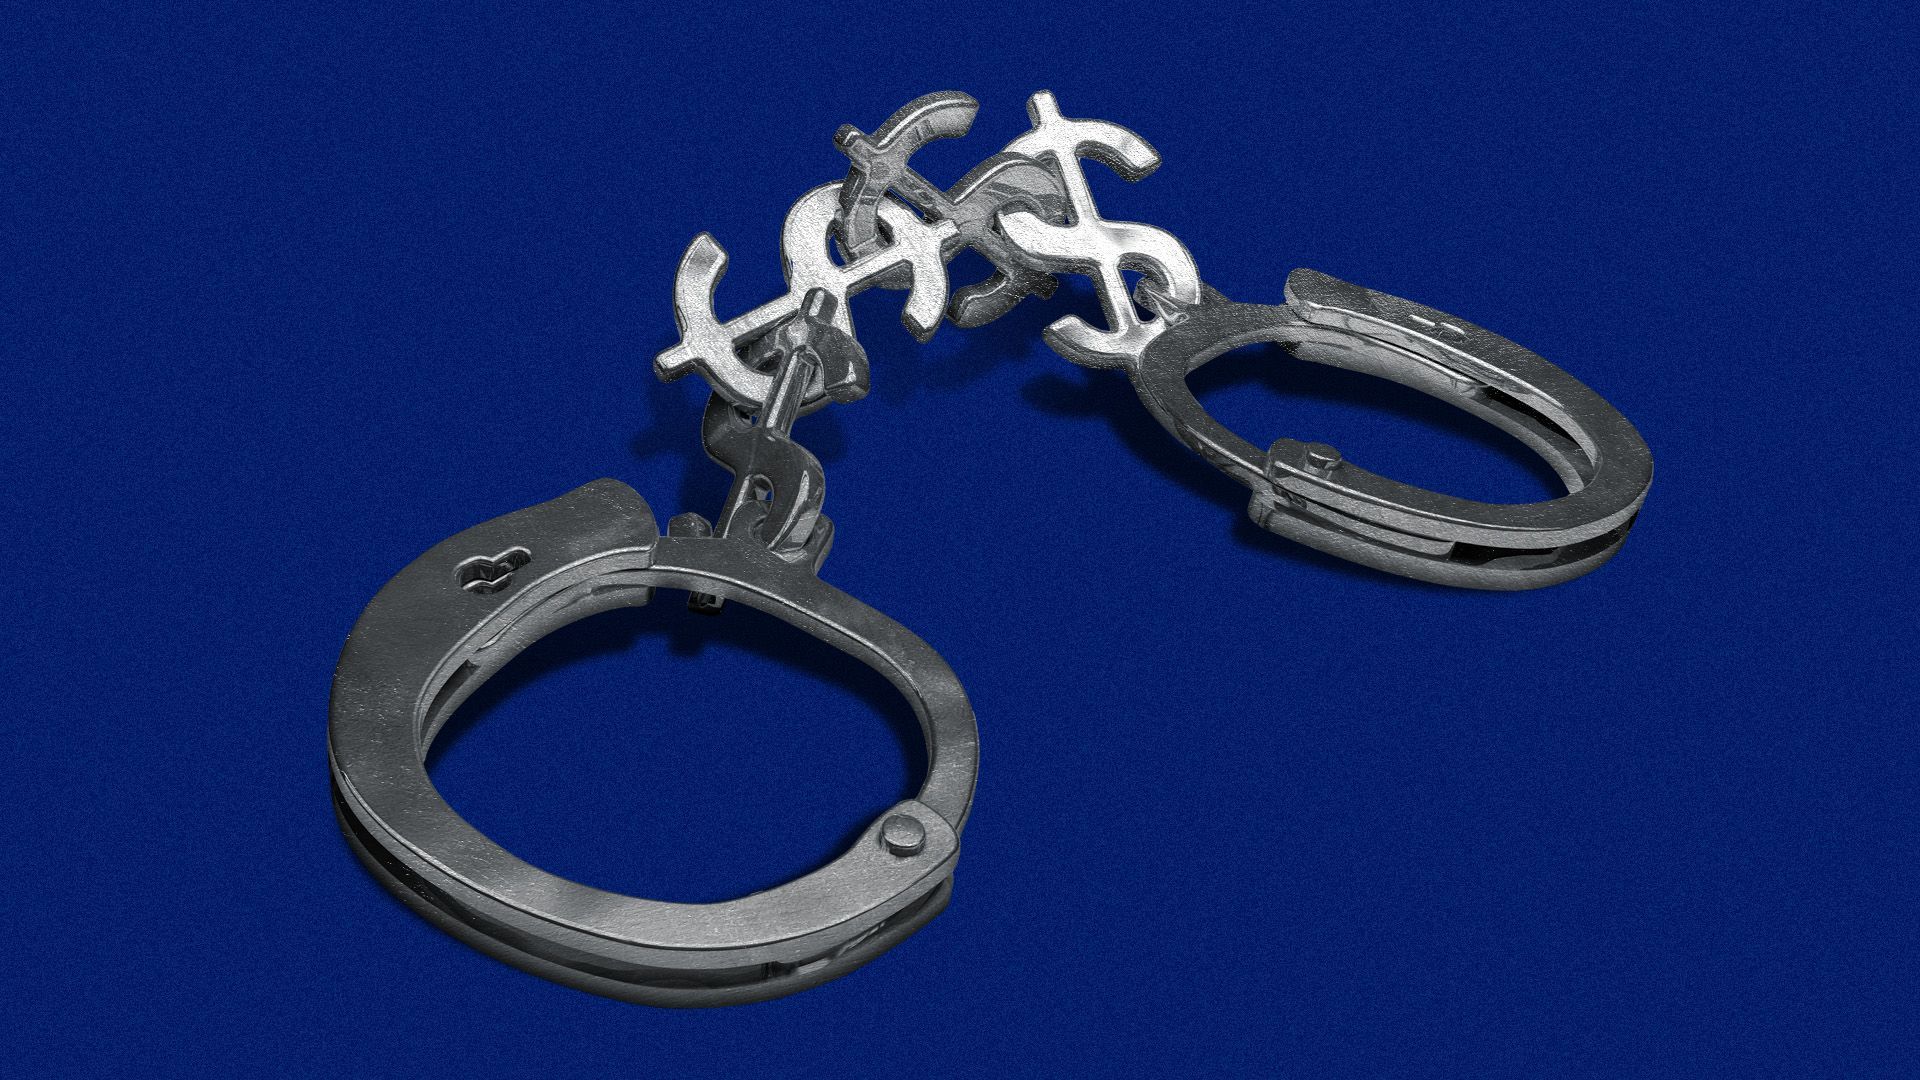 Illustration of police handcuffs with dollar signs linking them 